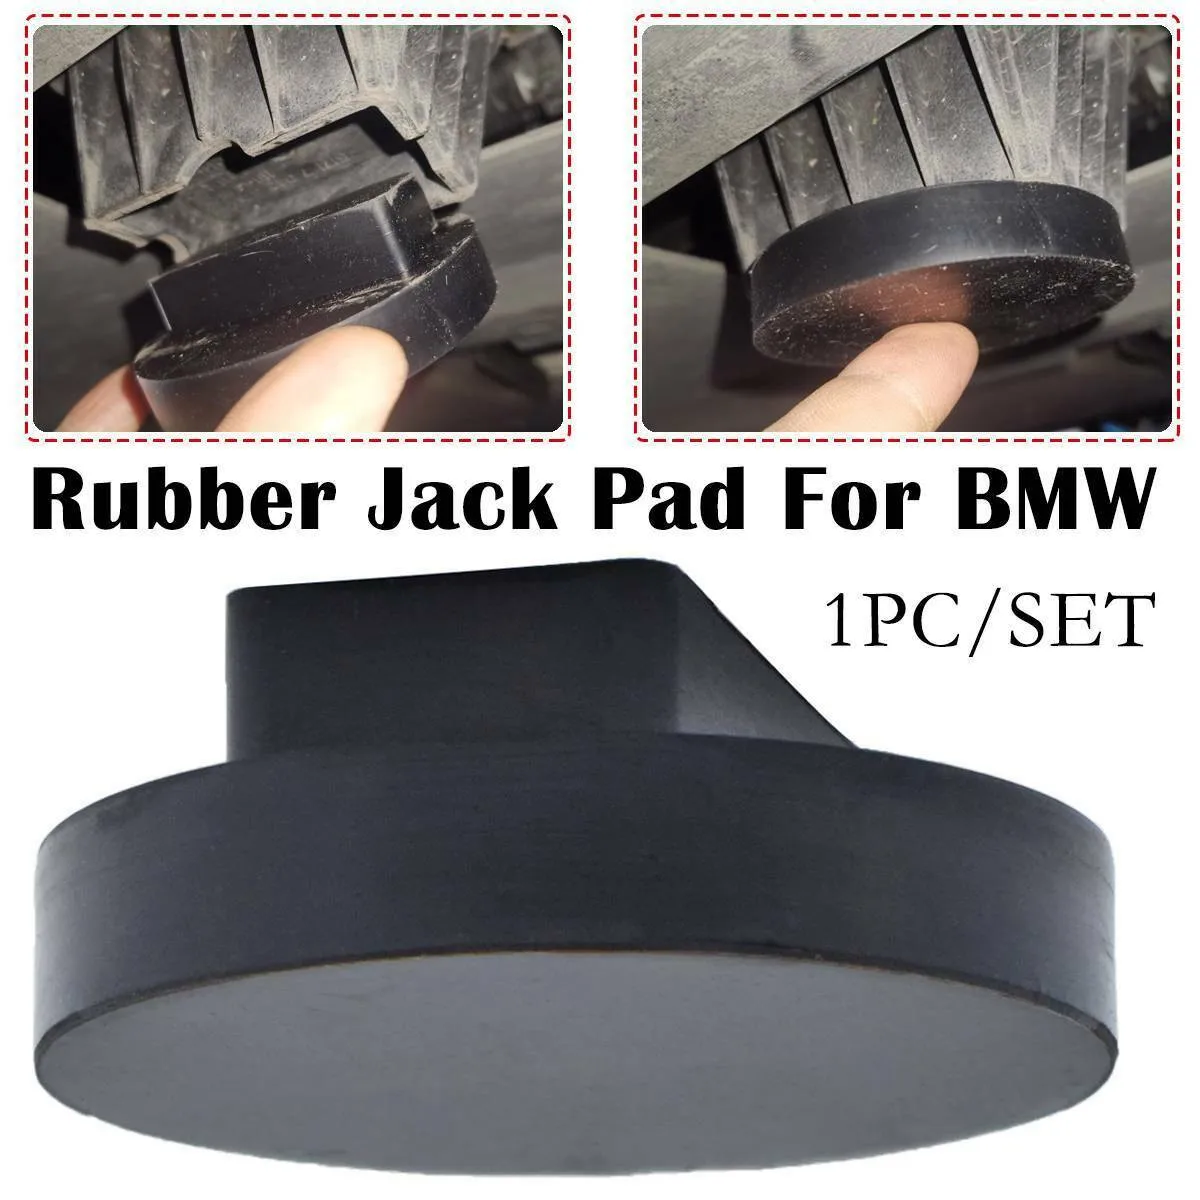 

Rubber Jacking Point Jack Pad Adaptor FOR BMW E46 E90 E91 E92 X1 X3 X5 X6 Z4 Z8 Slotted Floor Jack Pad Frame Rail Adapter